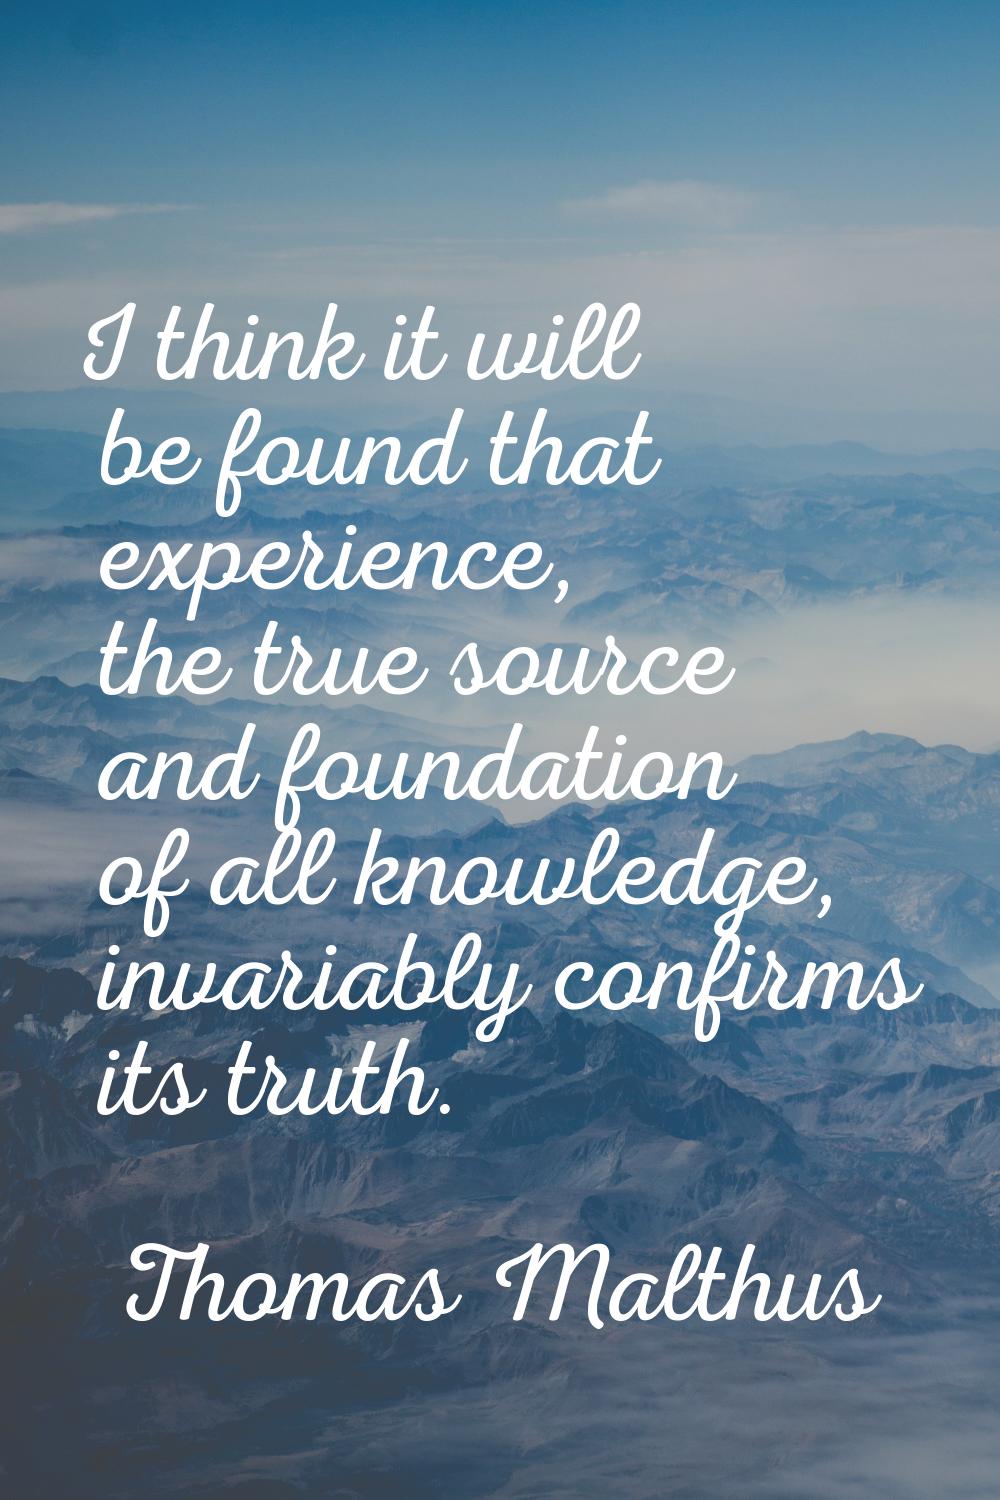 I think it will be found that experience, the true source and foundation of all knowledge, invariab